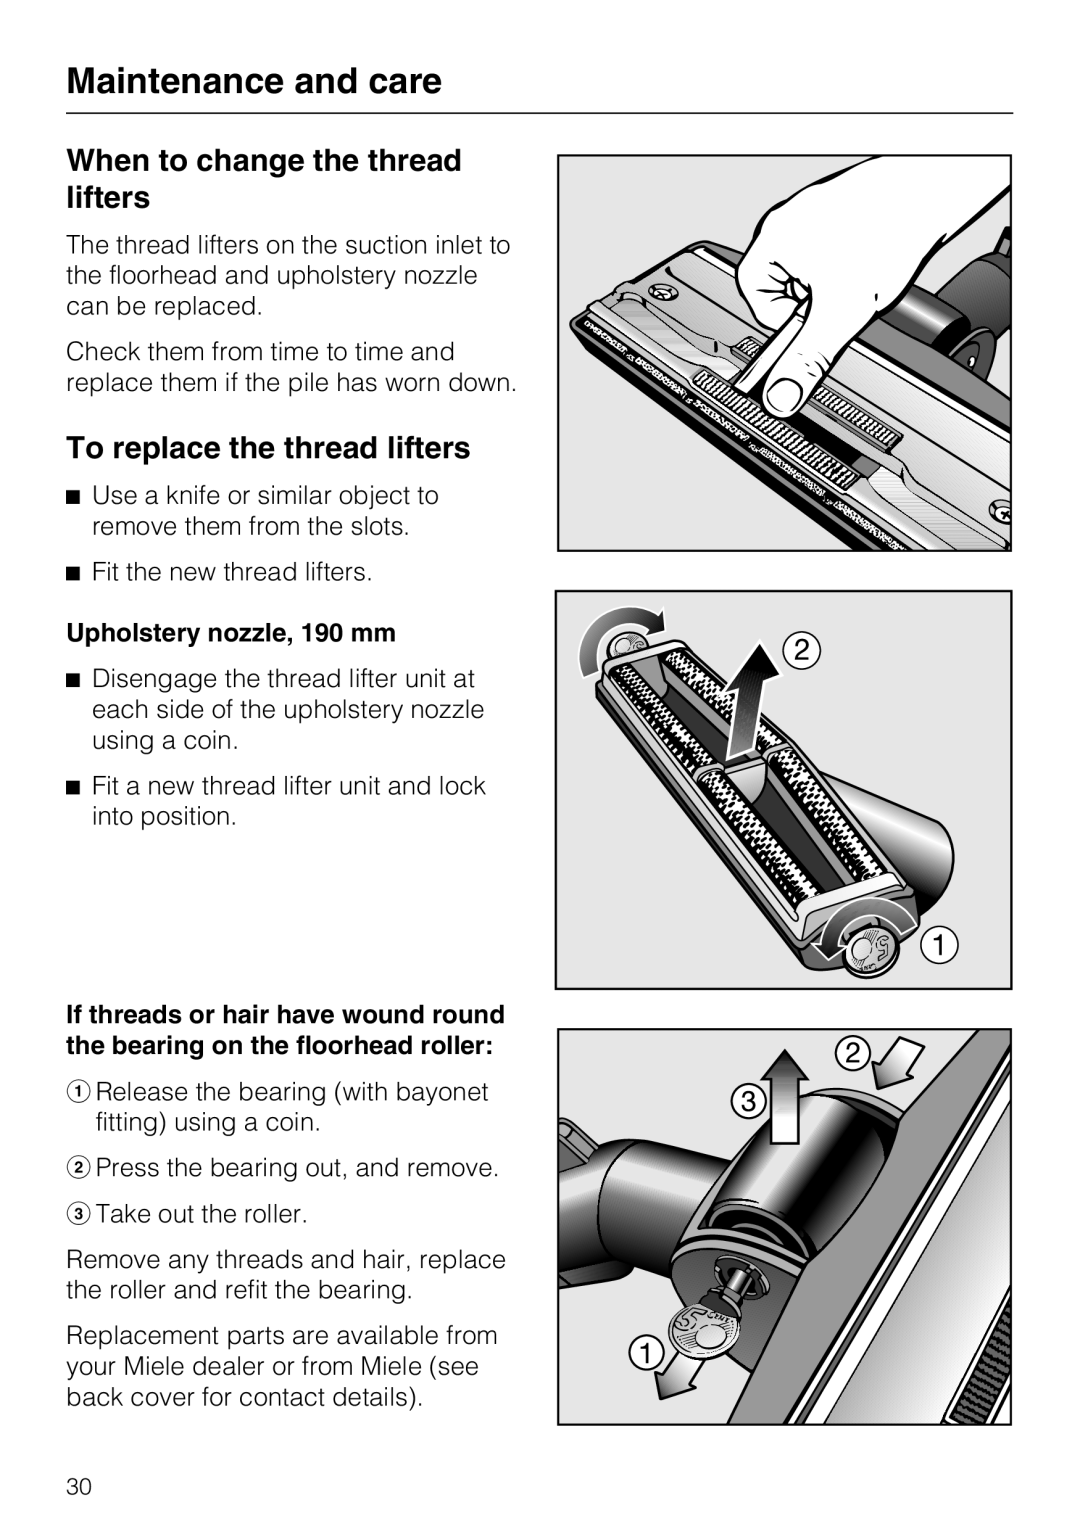 Miele S4212 manual When to change the thread lifters, To replace the thread lifters, Maintenance and care 